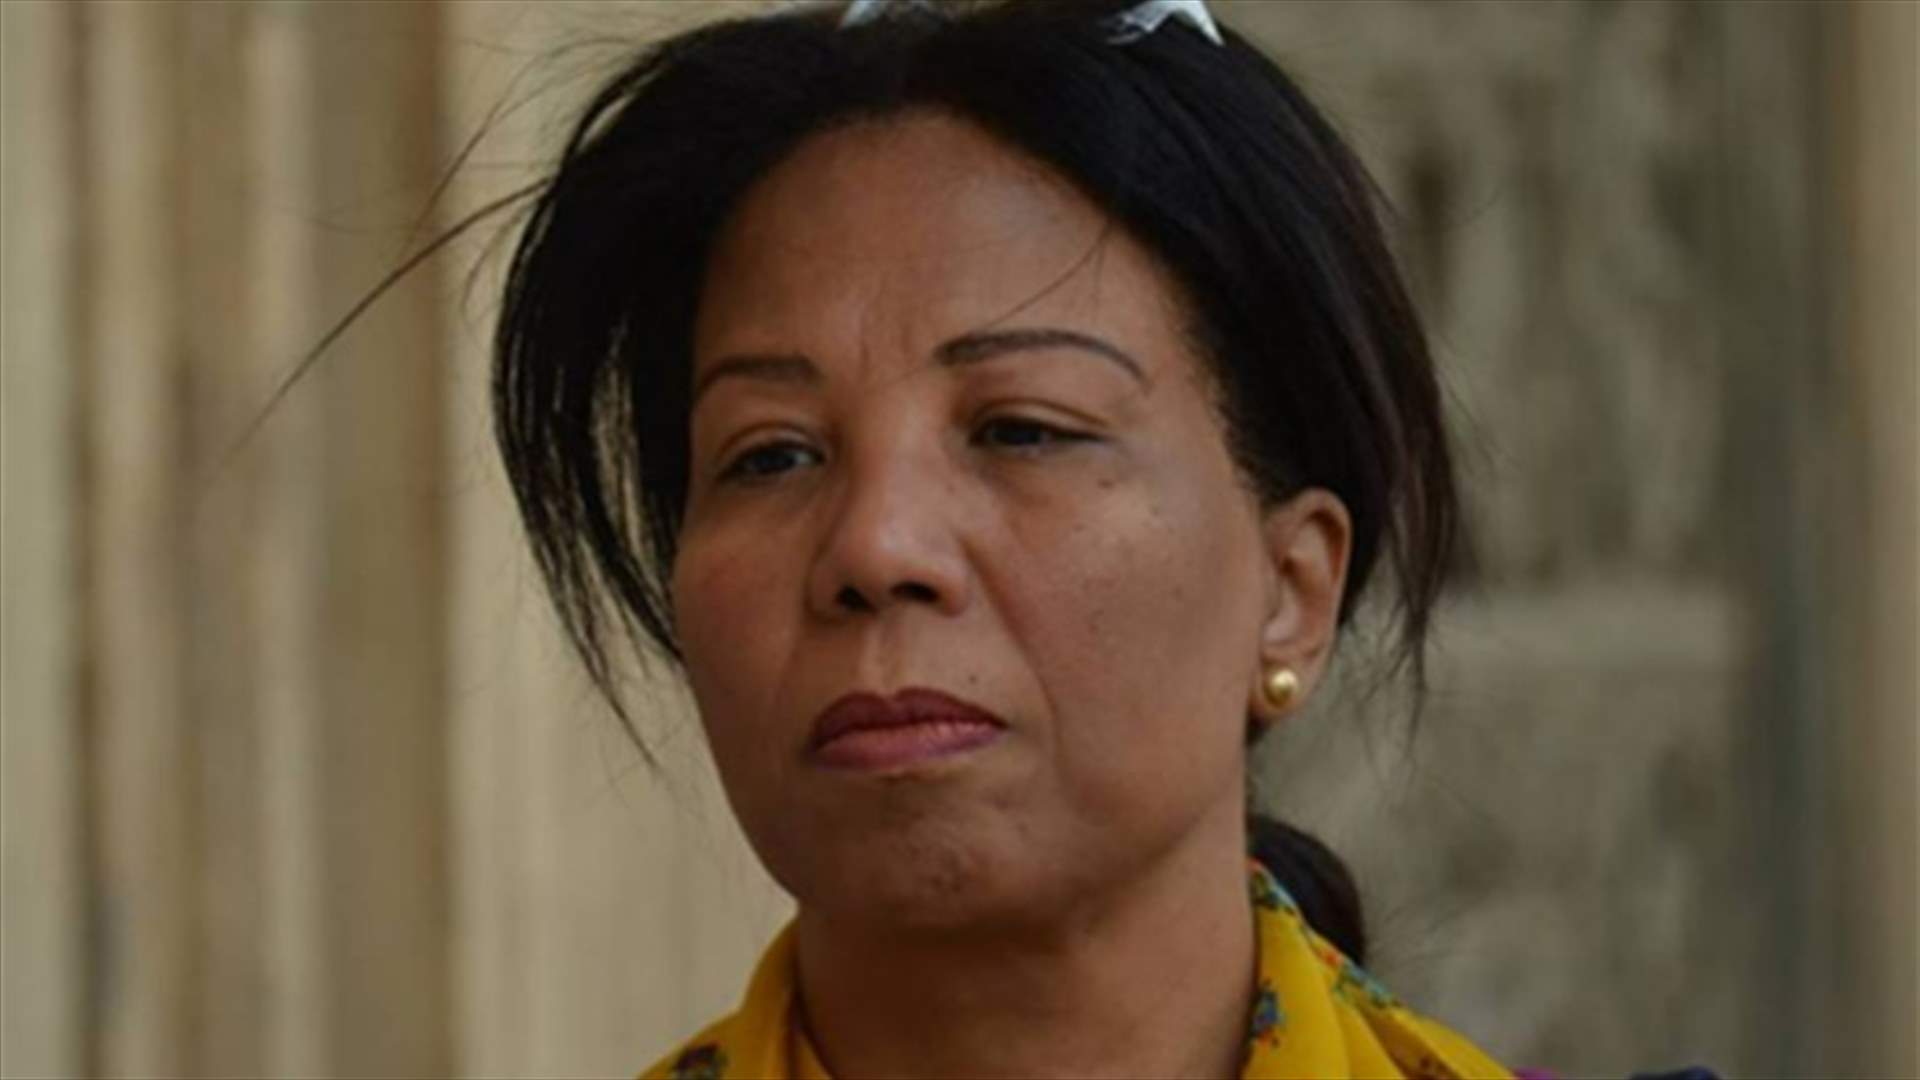 Egyptian women&#39;s rights advocate Azza Soliman freed on bail